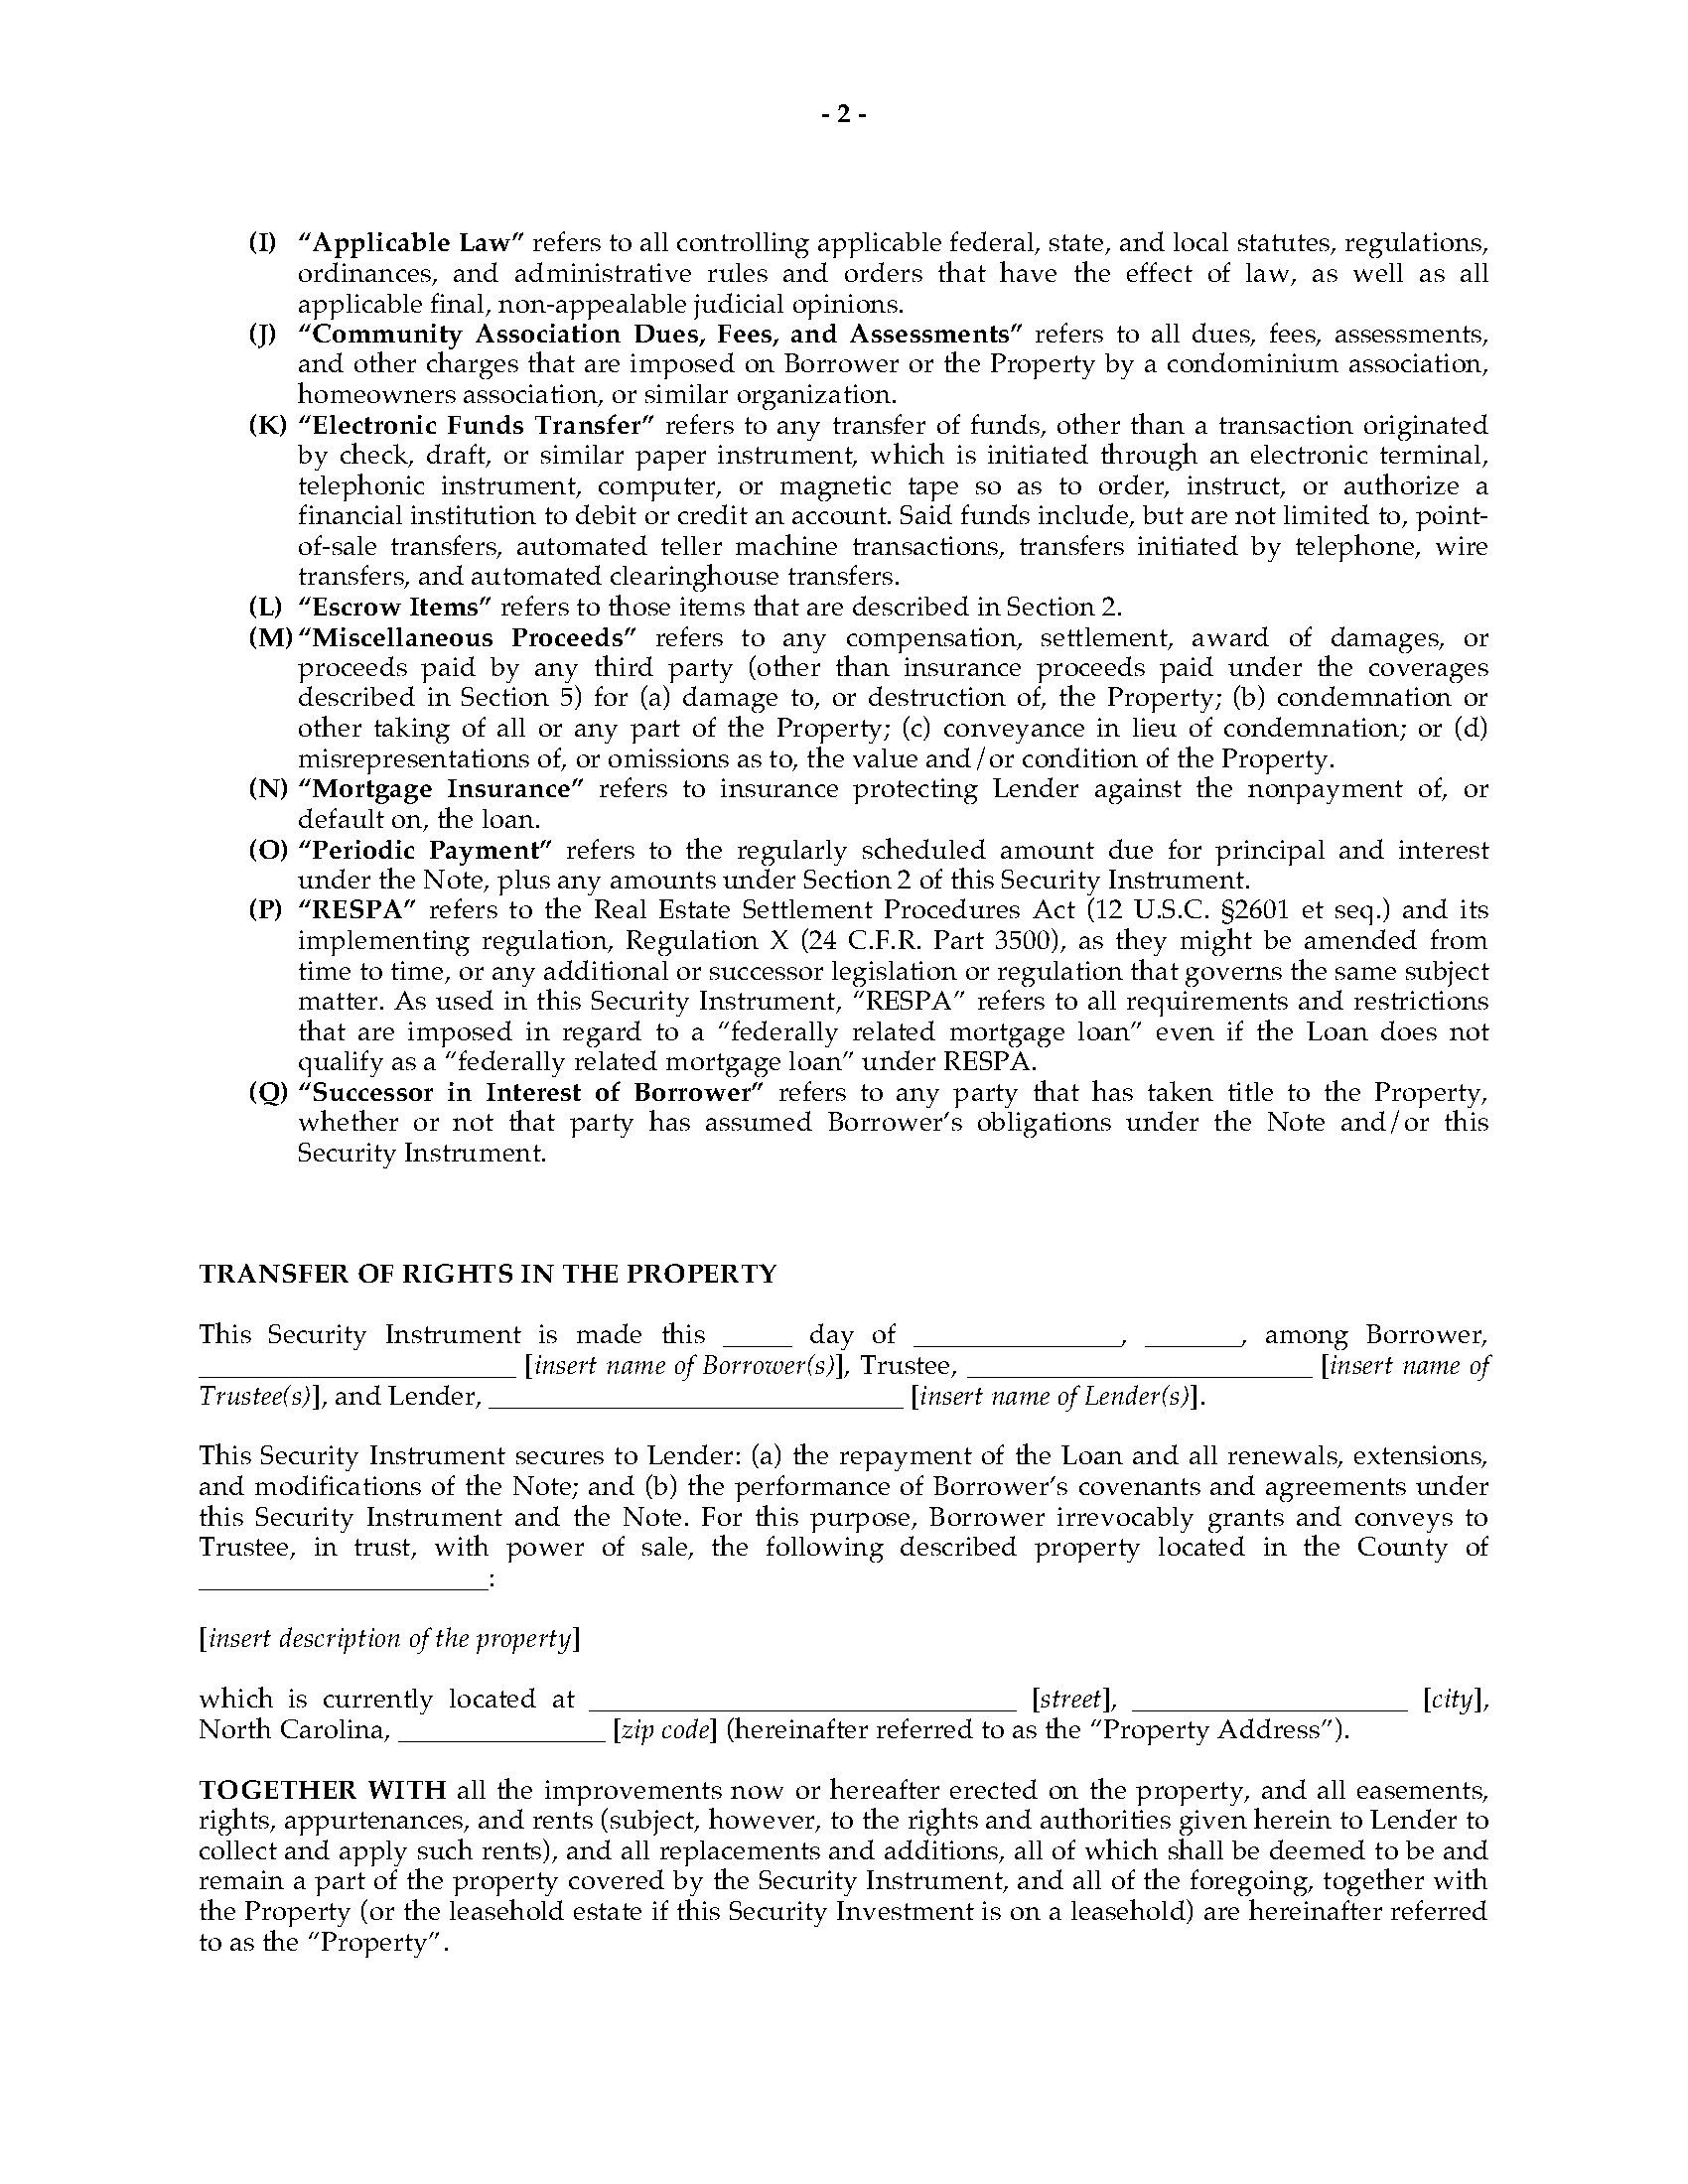 North Carolina Deed Of Trust Legal Forms And Business Templates Megadox Com